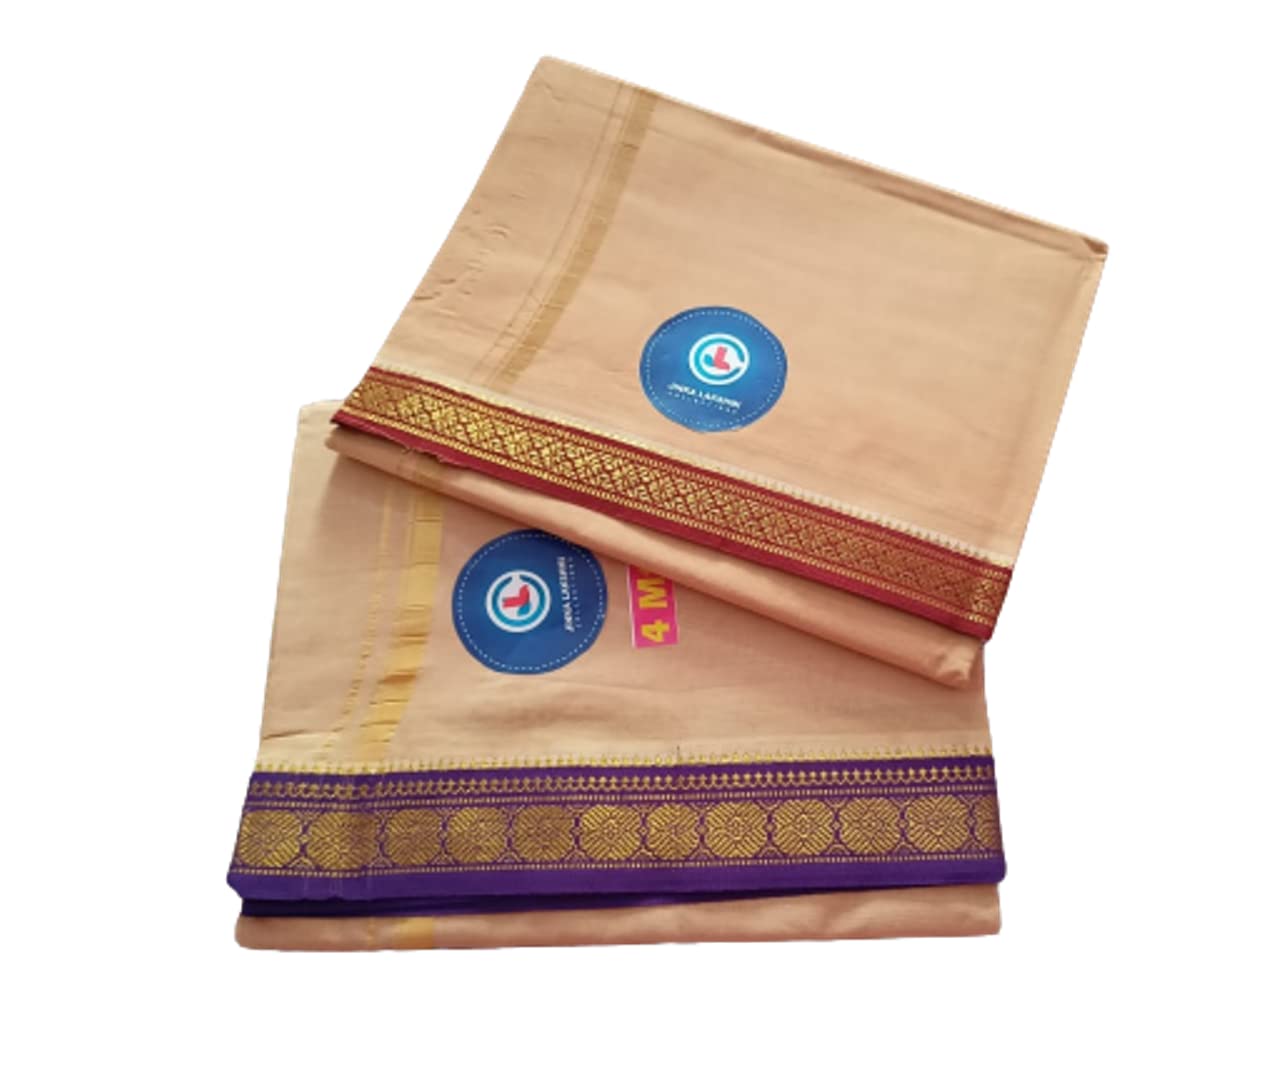 Jinka Lakshmi Collections 100% Handloom Biege Color Cotton Dhoti With Zari Border Up and Down 4 Meters Unstitched Pack of 2 (Multicolor-07)